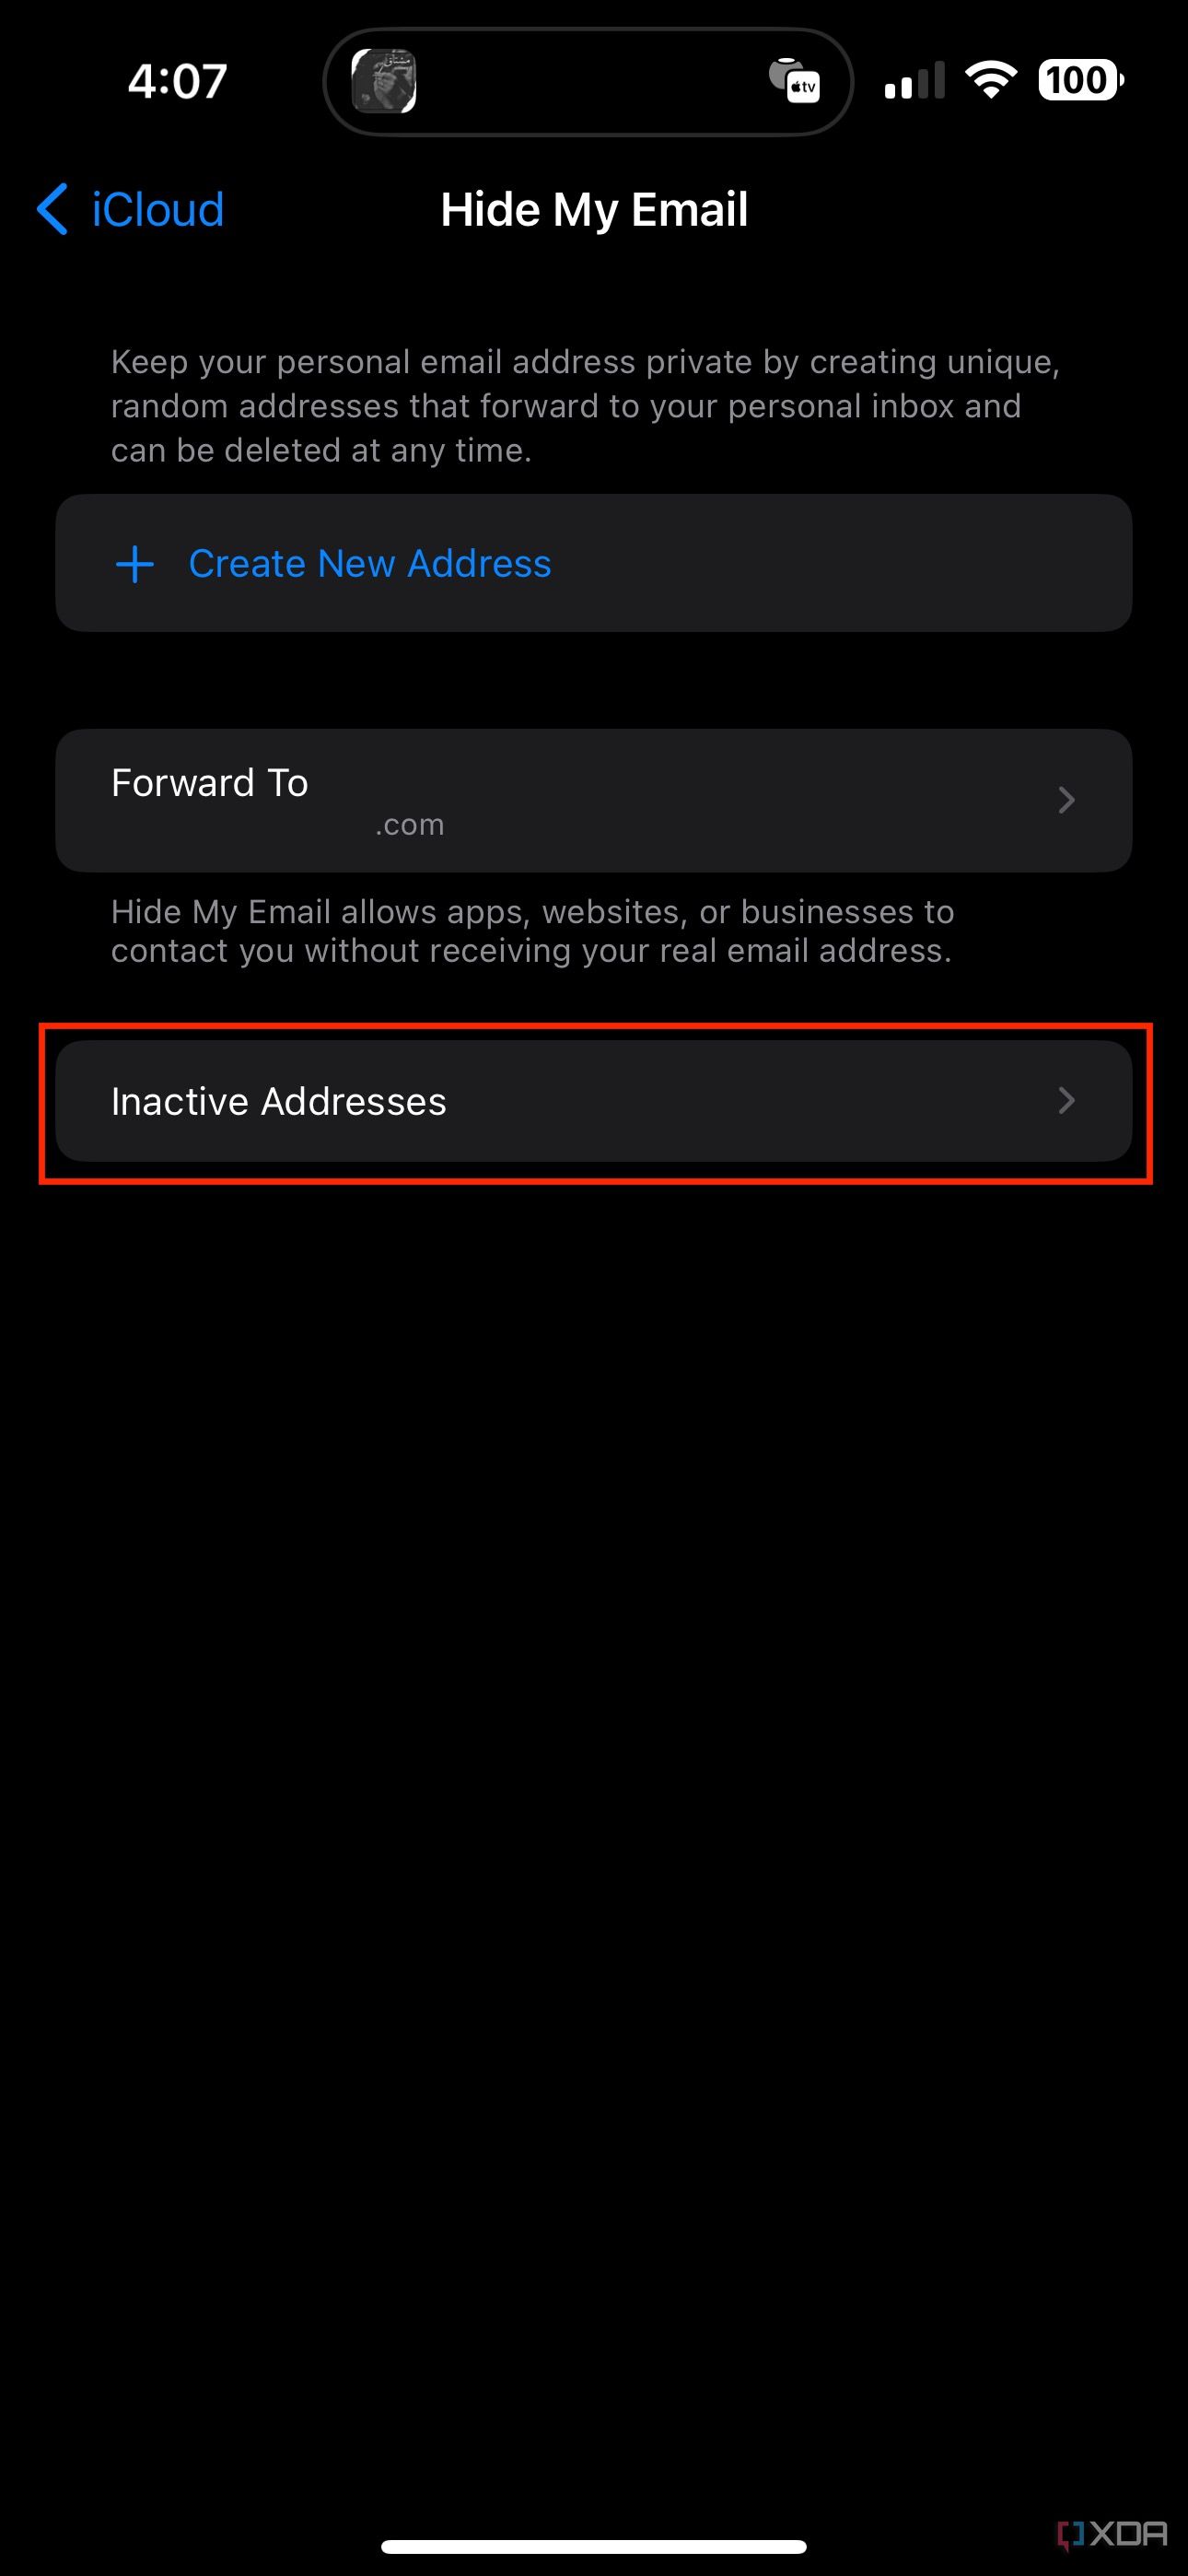 inactive addresses section in hide my email settings